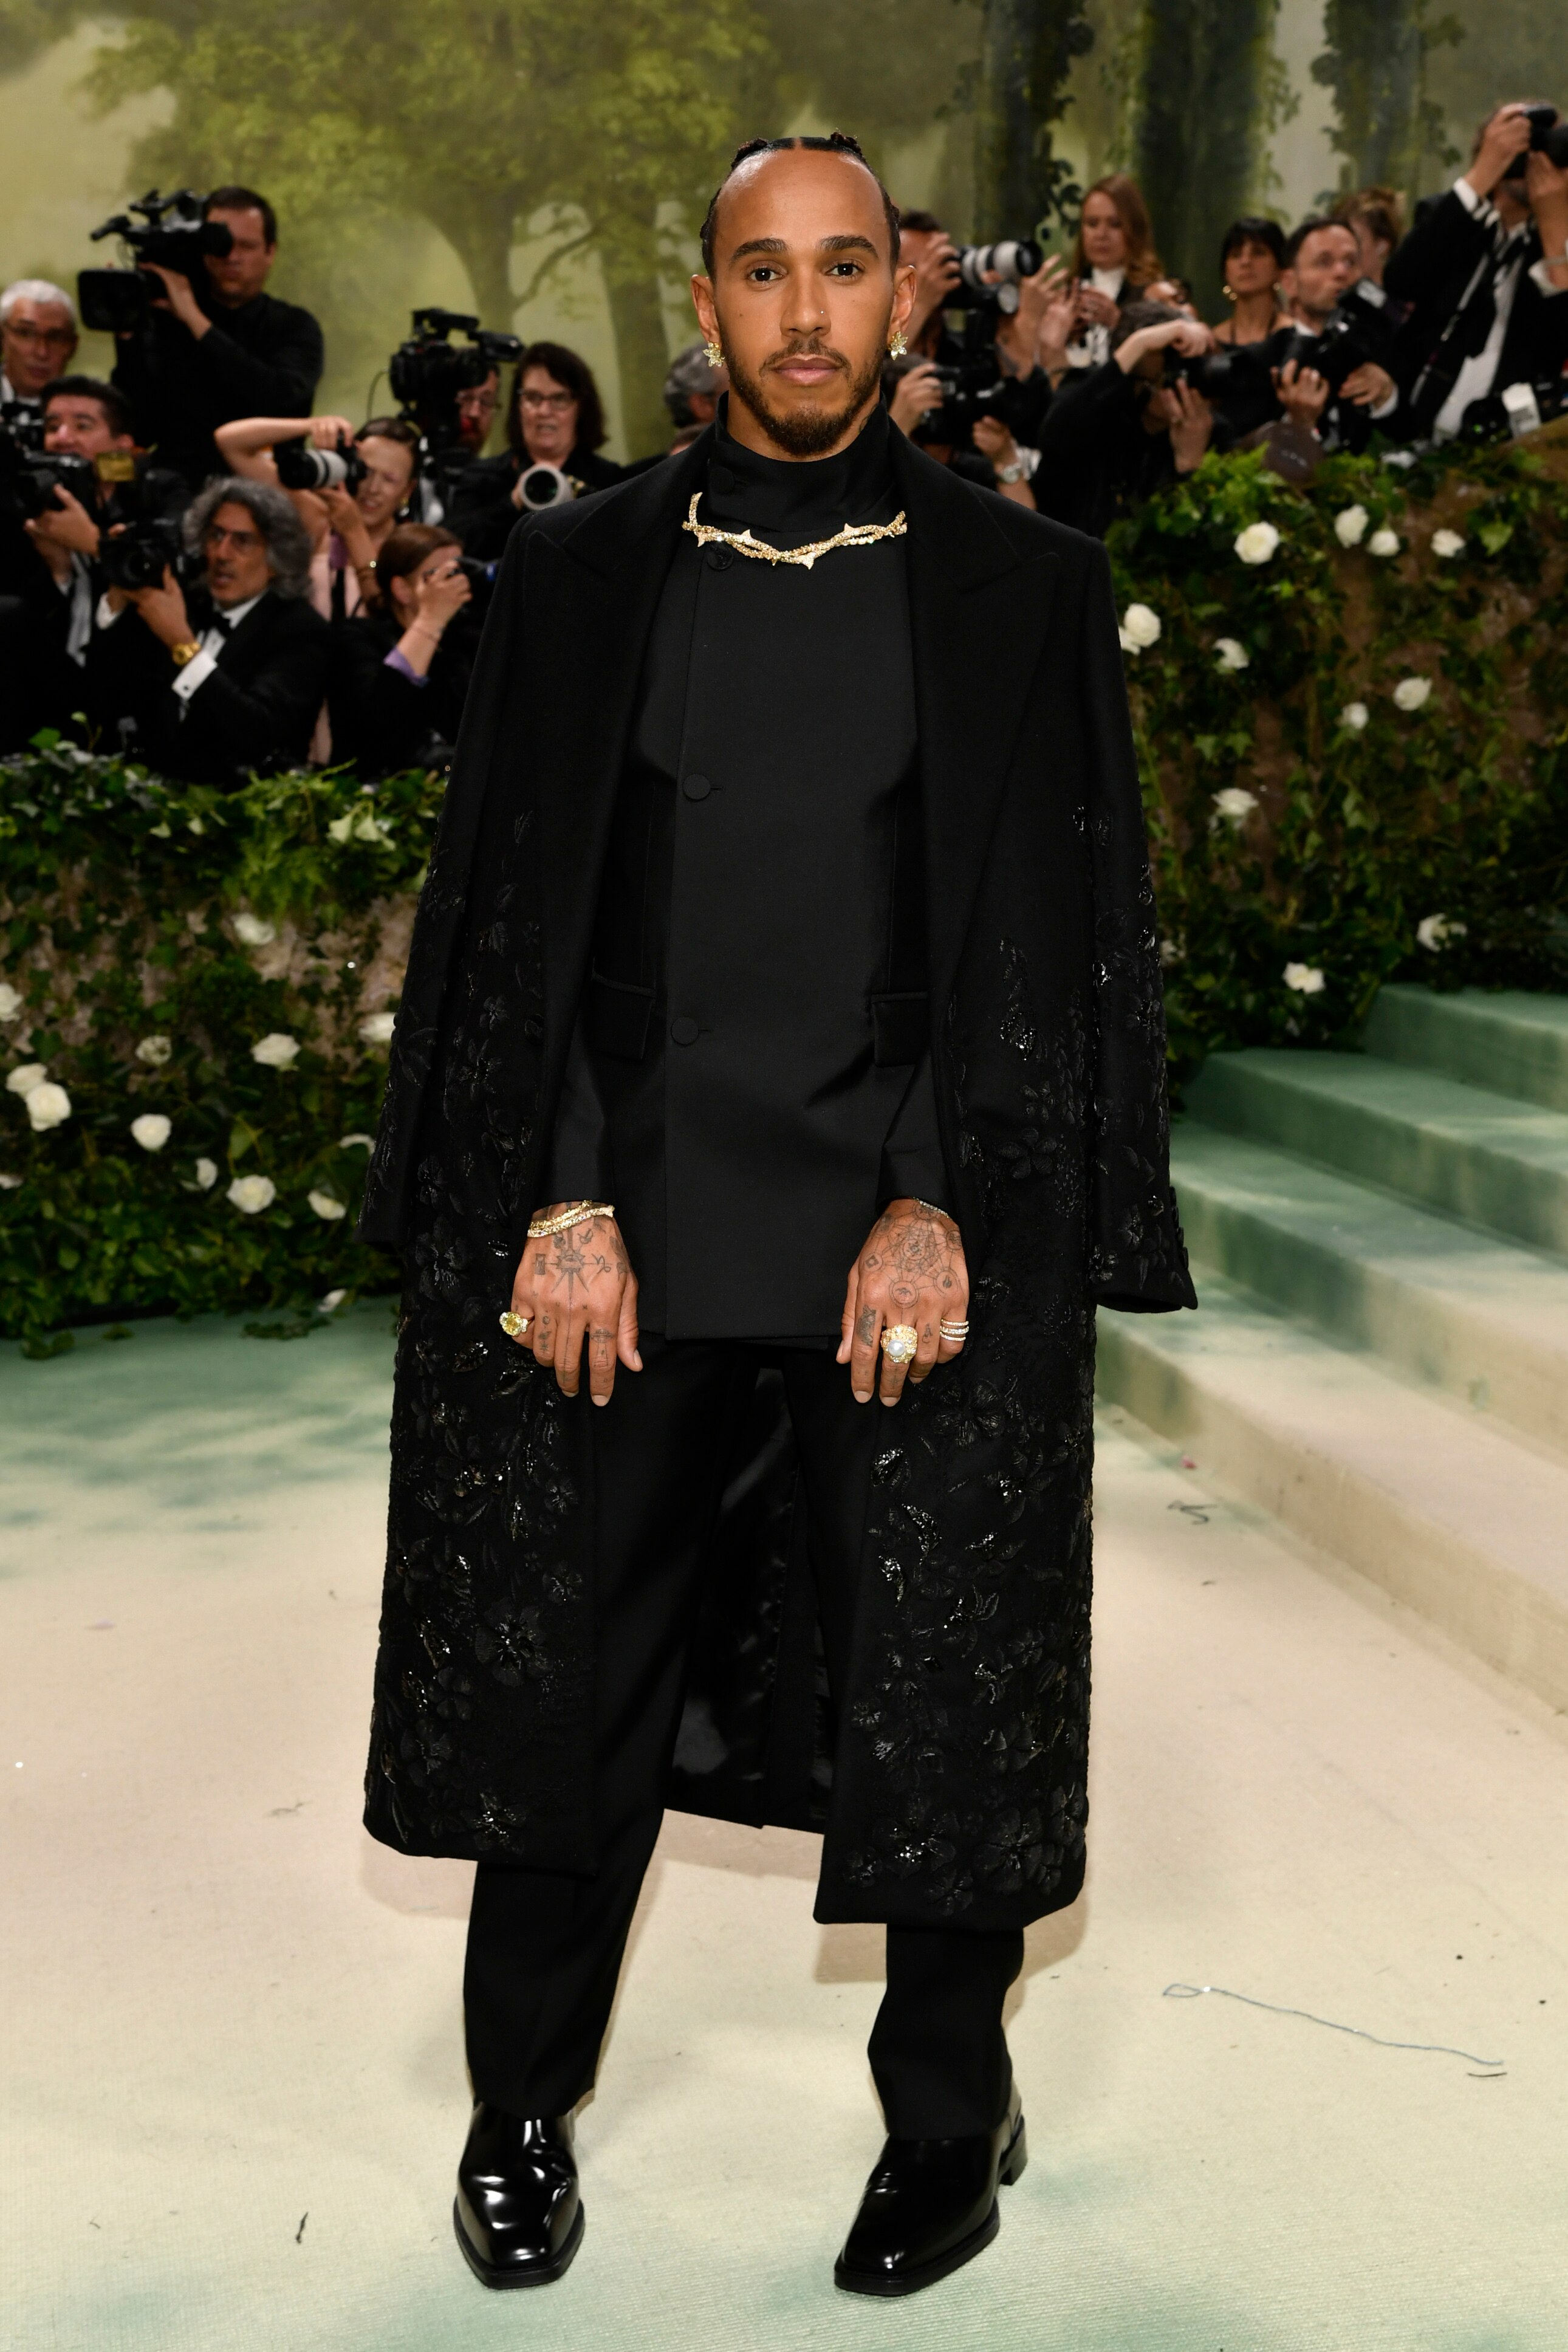 Lewis Hamilton wearing a black suit with a cloak clasped with a gold thorny necklace